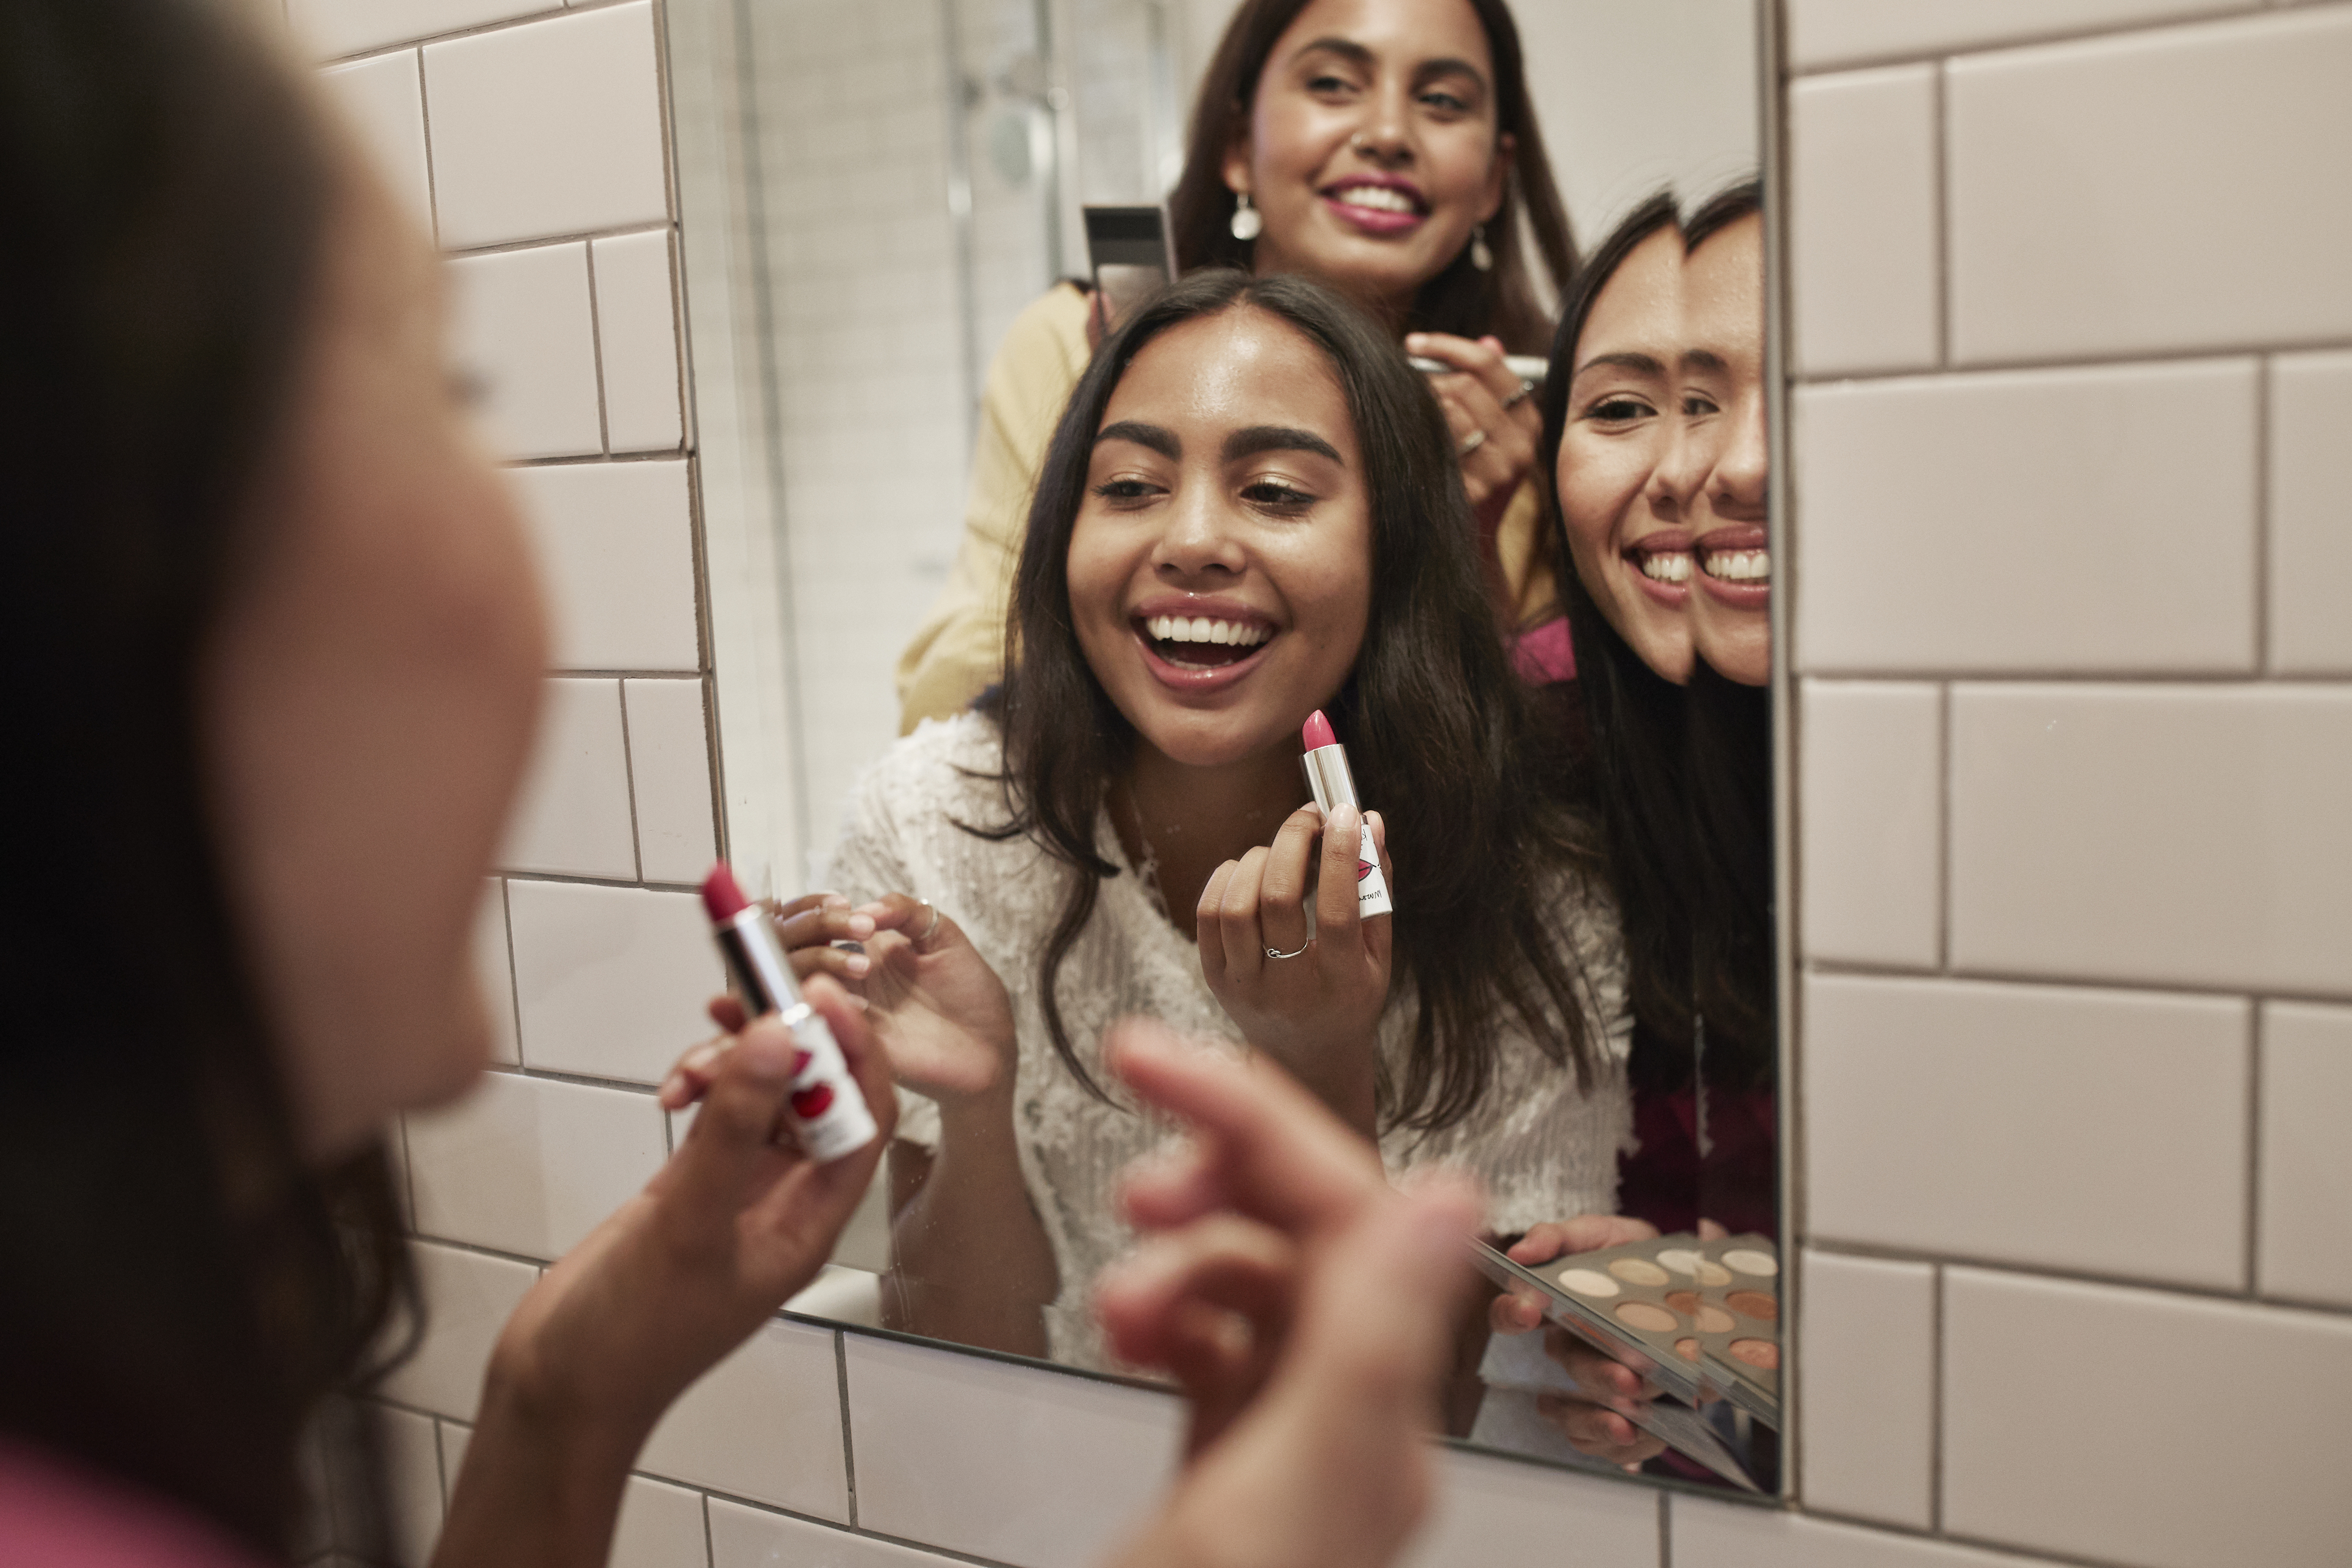 Three friends are smiling and applying makeup in a mirror